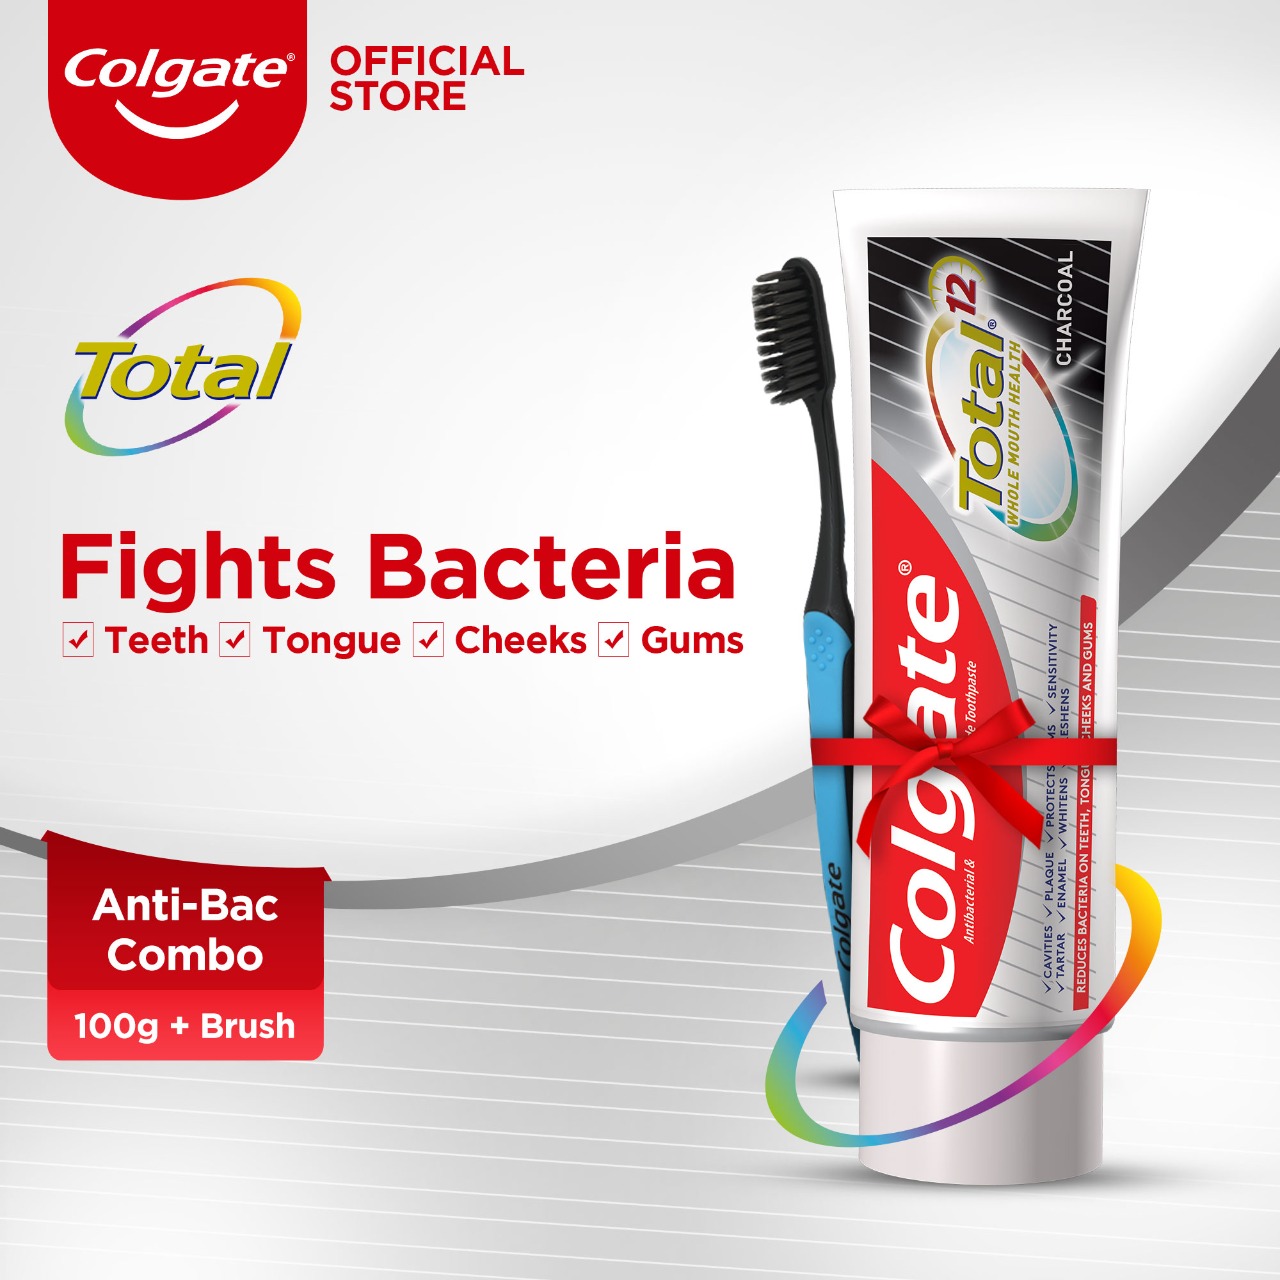 Anti-bac Combo - Colgate Total Charcoal Toothpaste 100g + Slimsoft Charcoal Toothbrush